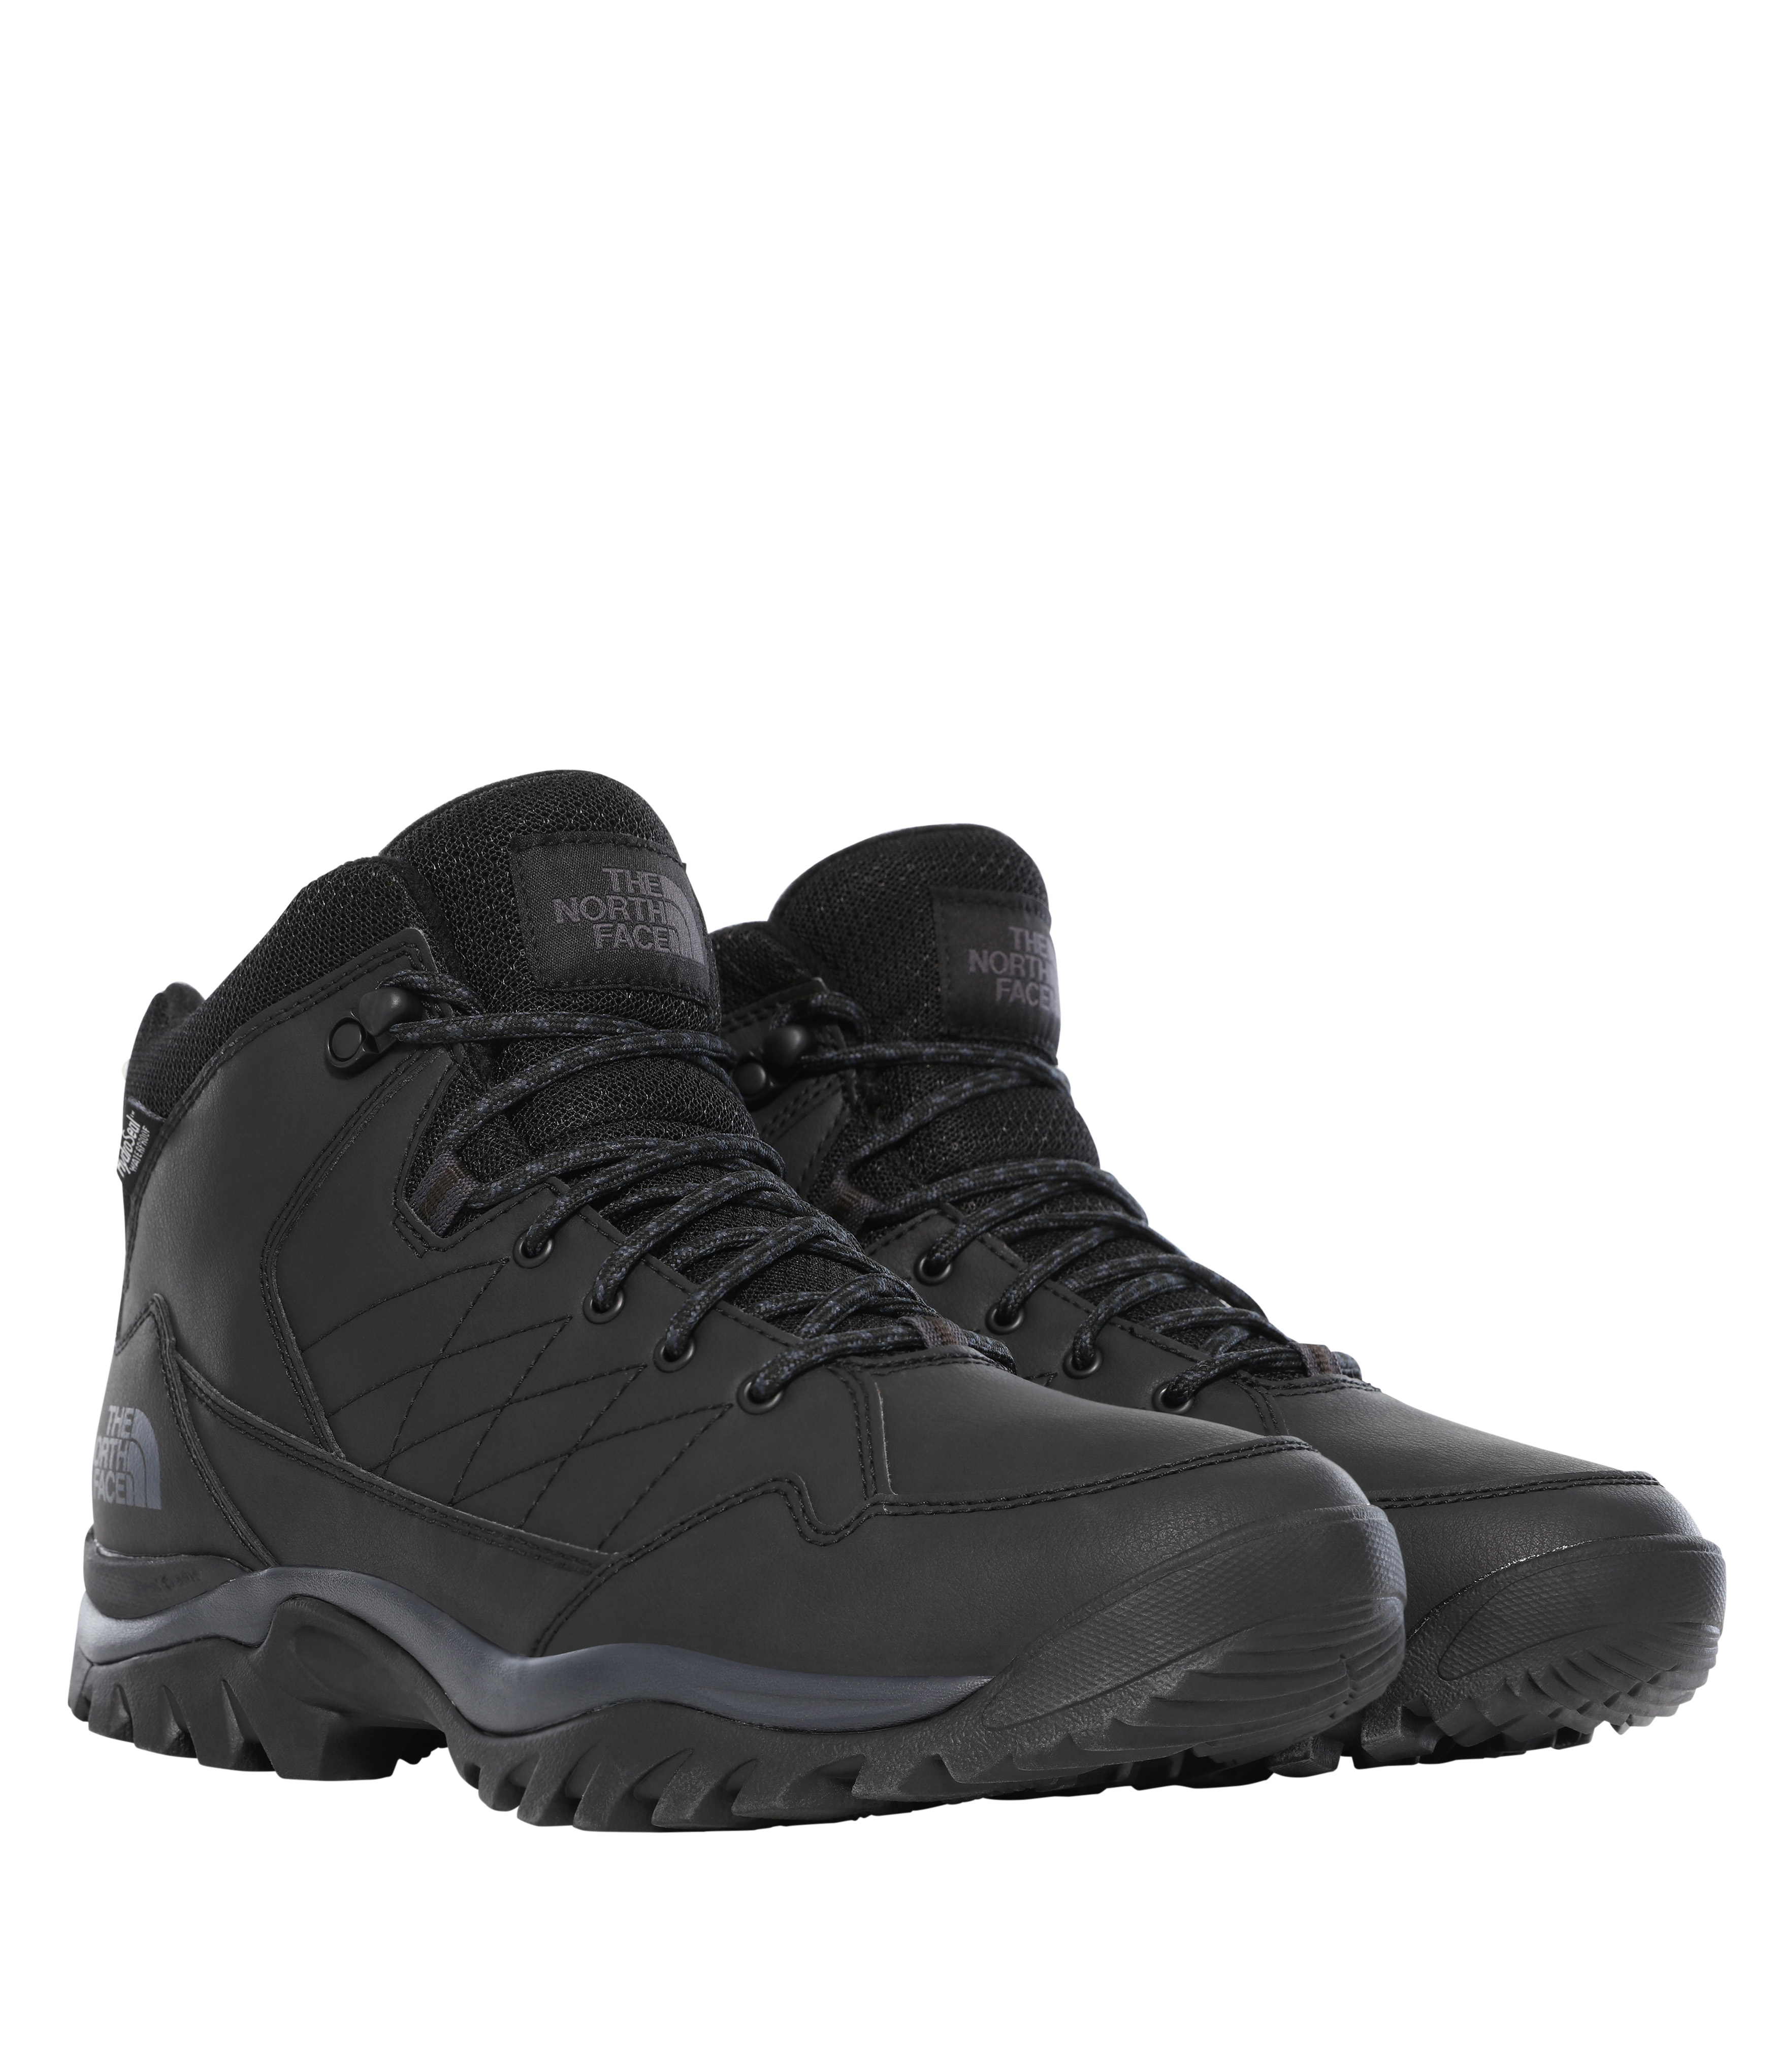 the north face m storm strike wp